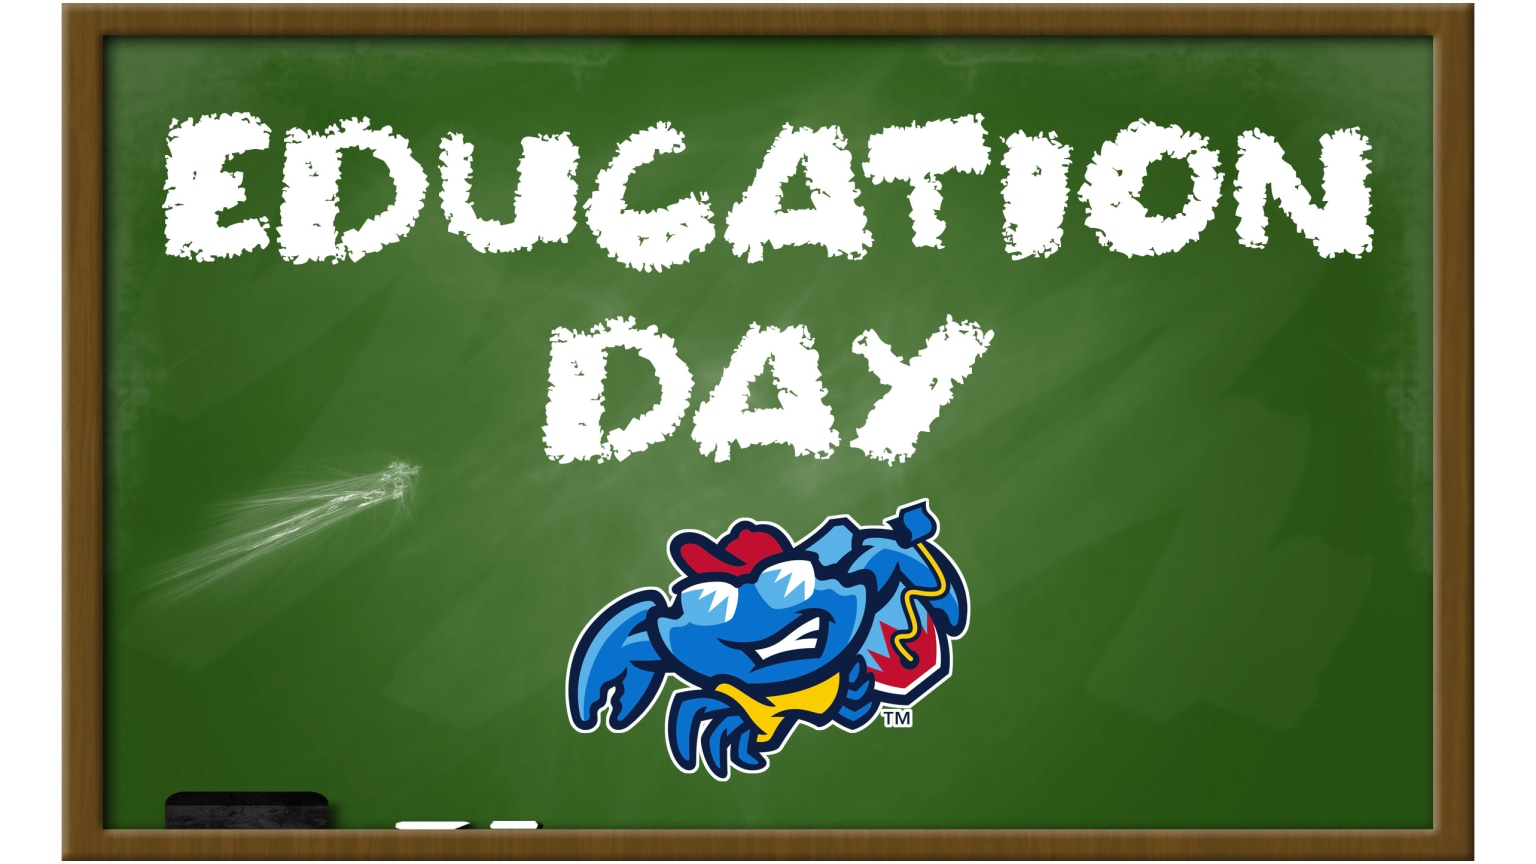 May 29th: Education Day